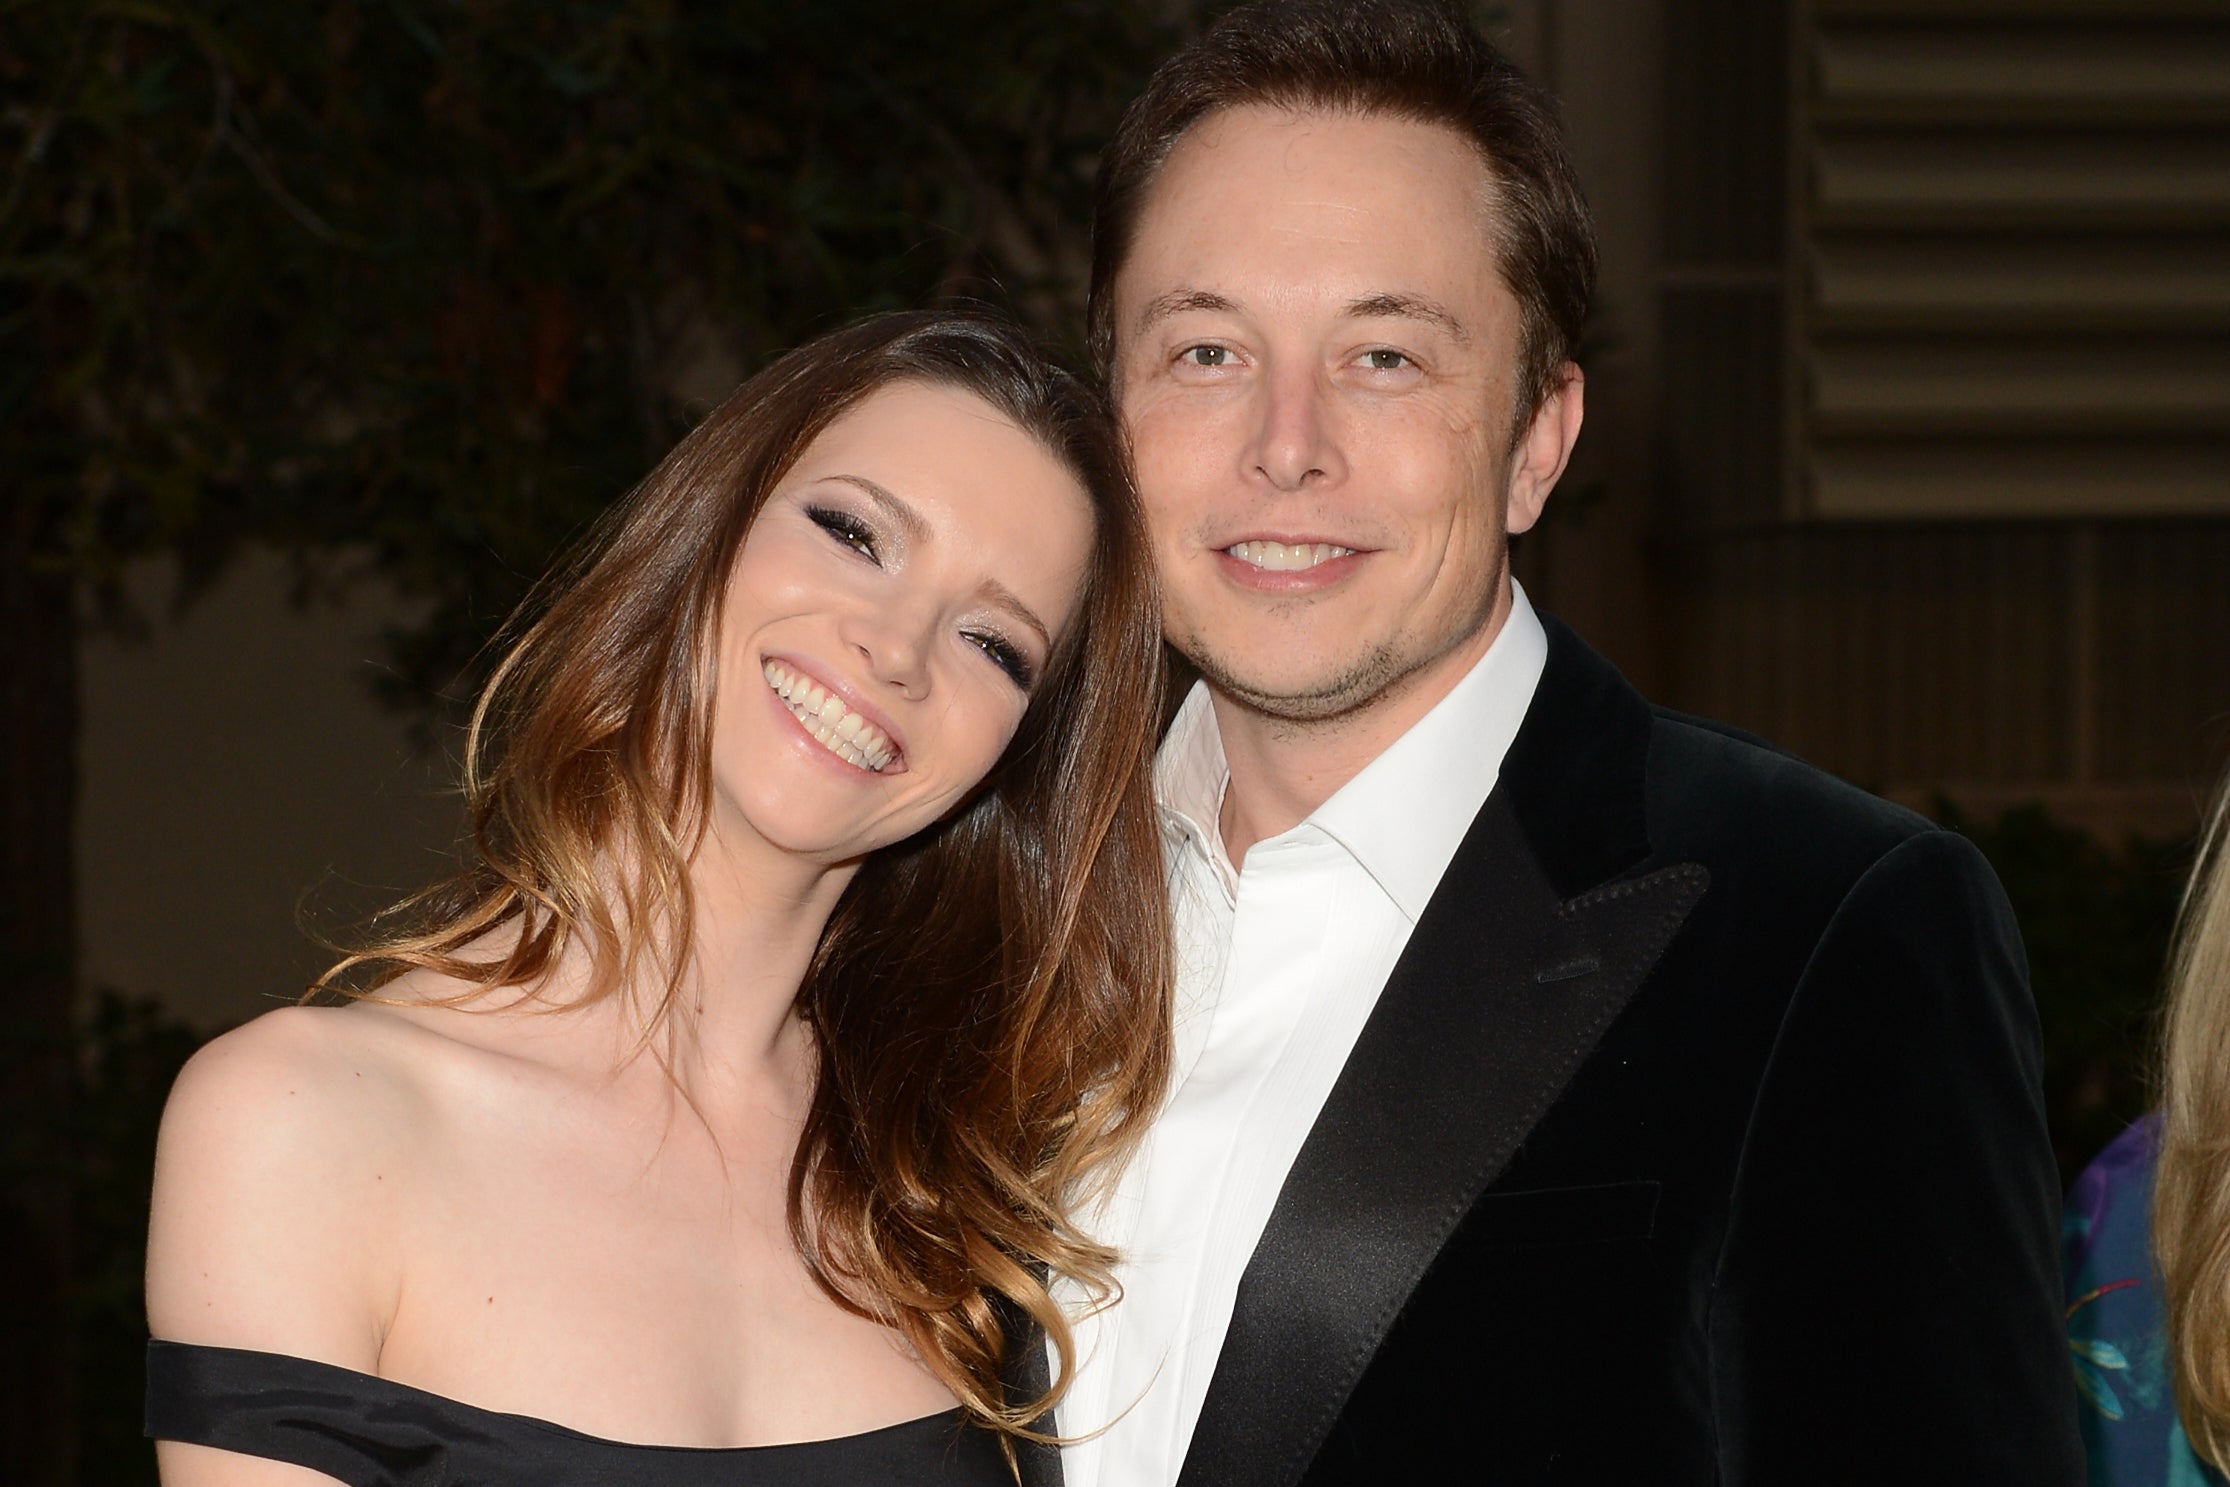 Elon Musk first married British actress Talulah Riley in 2010.